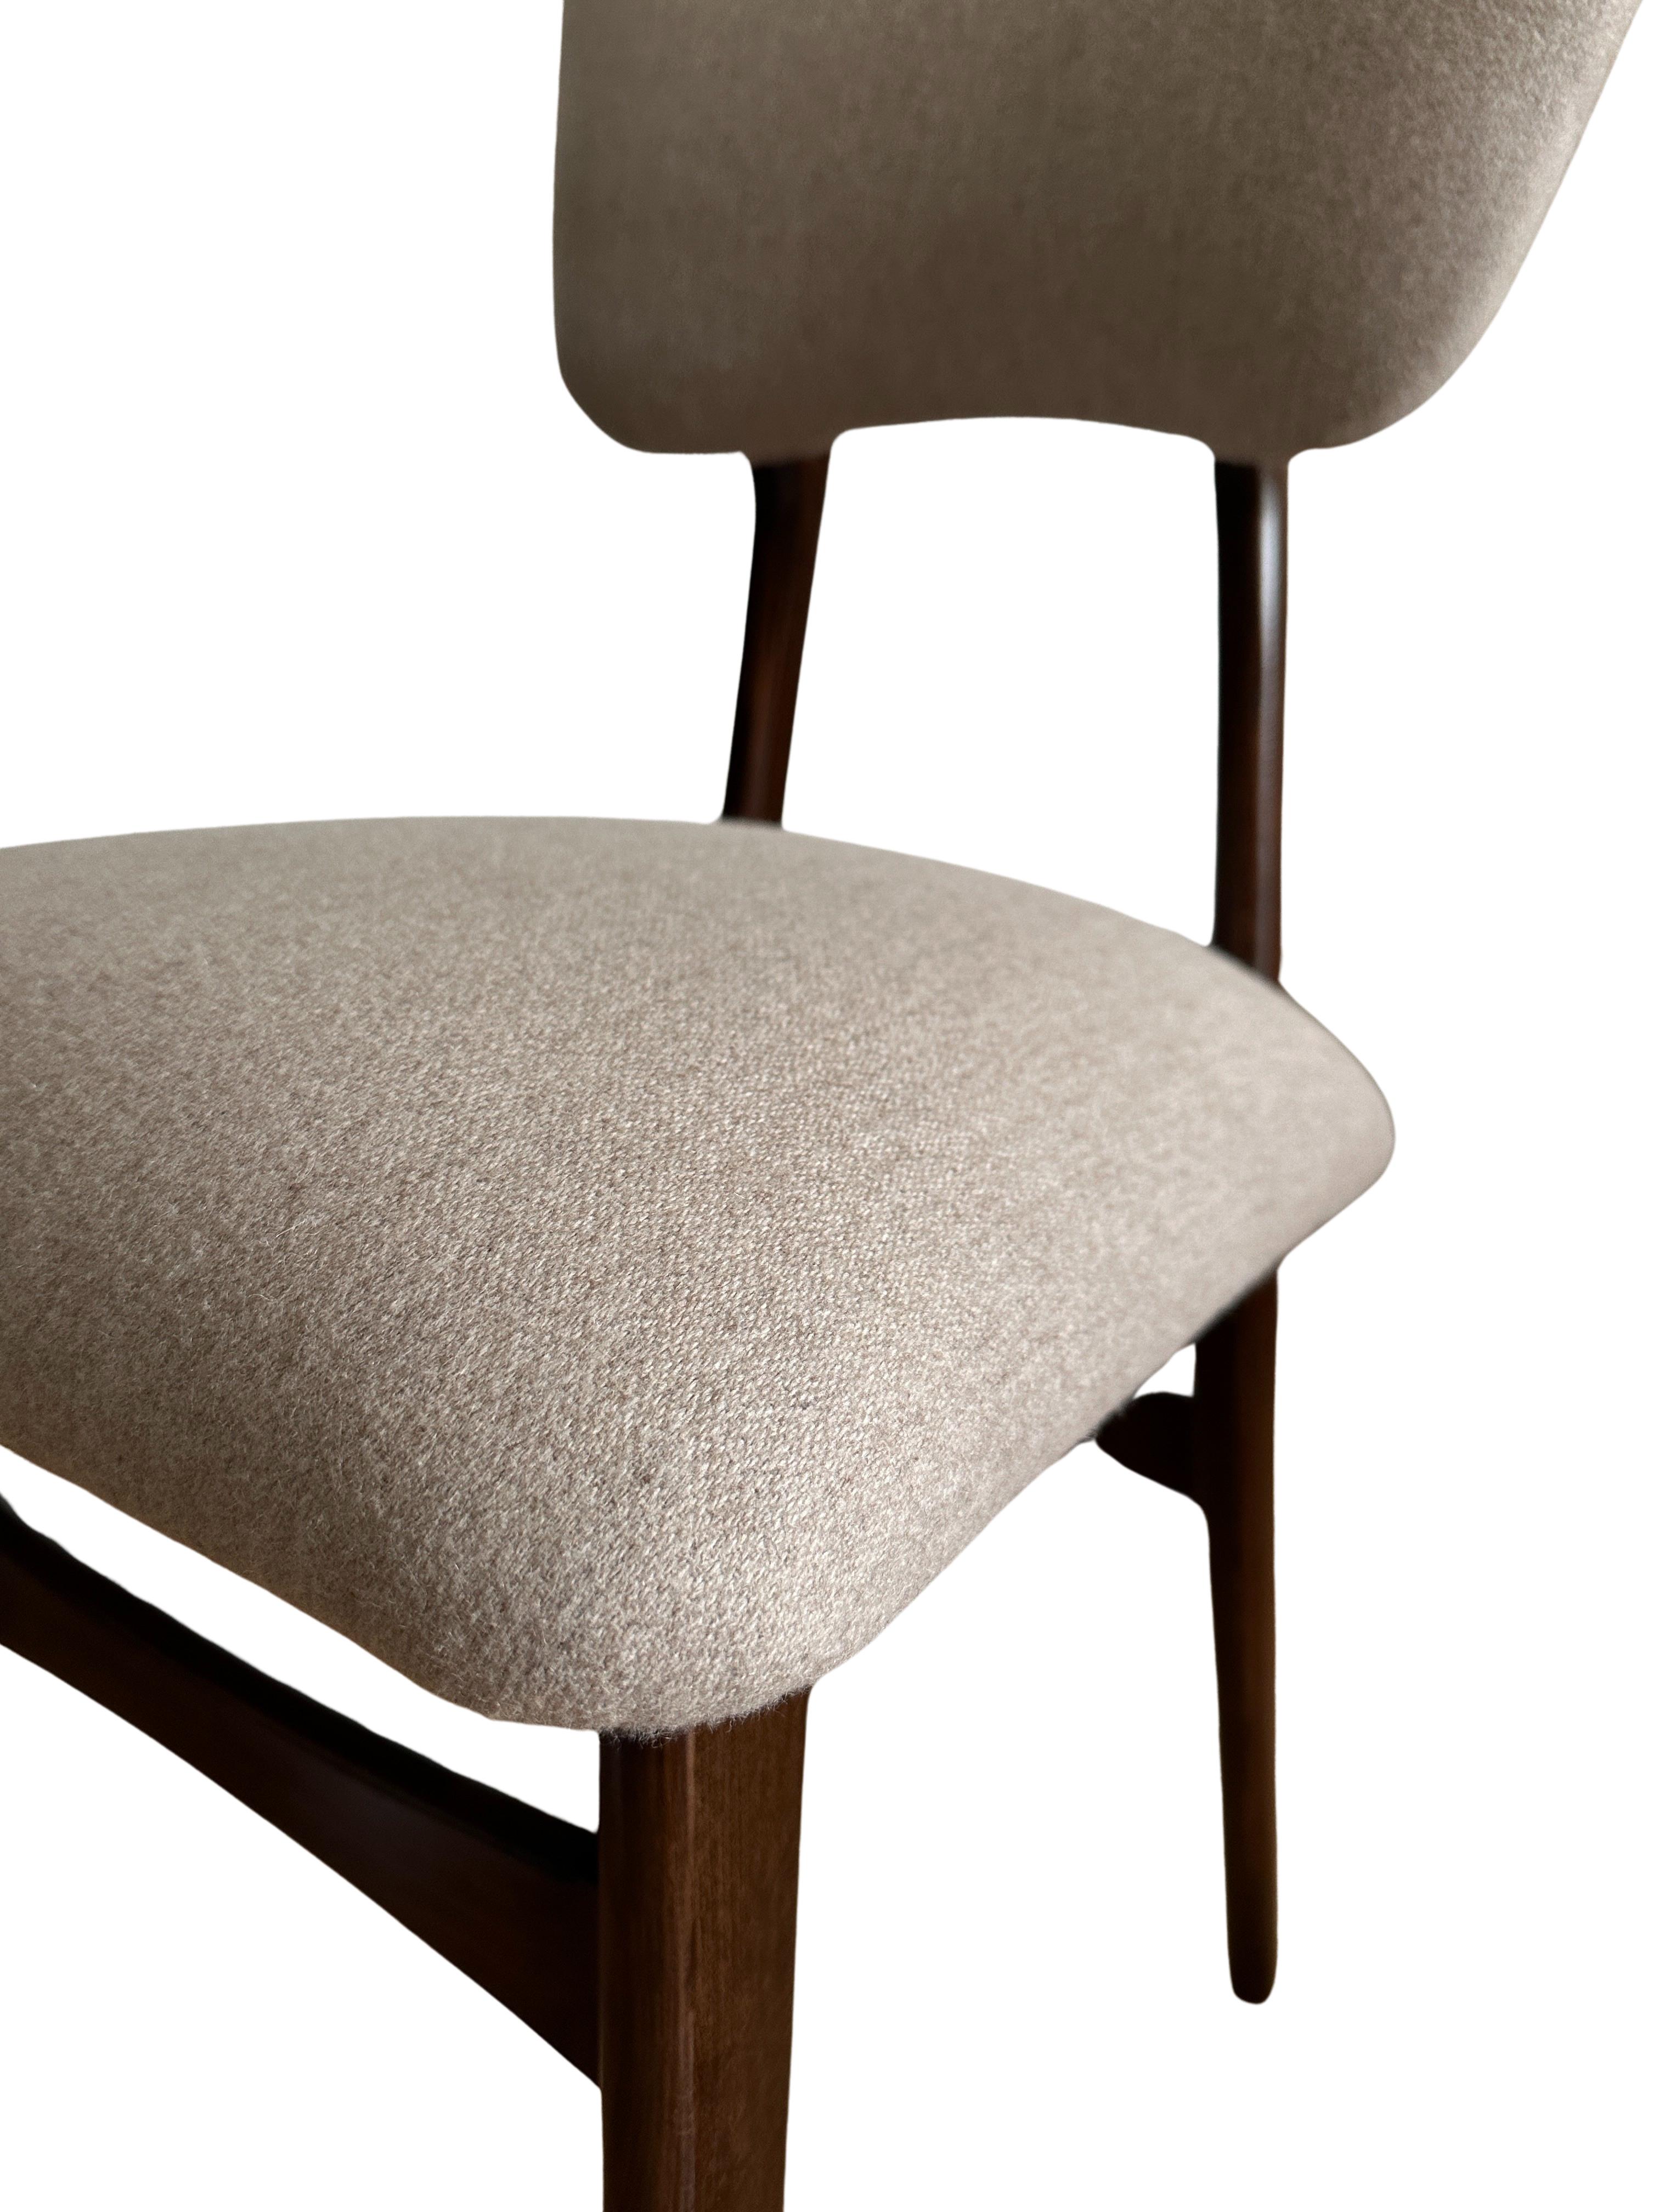 Midcentury Dining Chair in Beige Wool Upholstery, Poland, 1960s For Sale 3